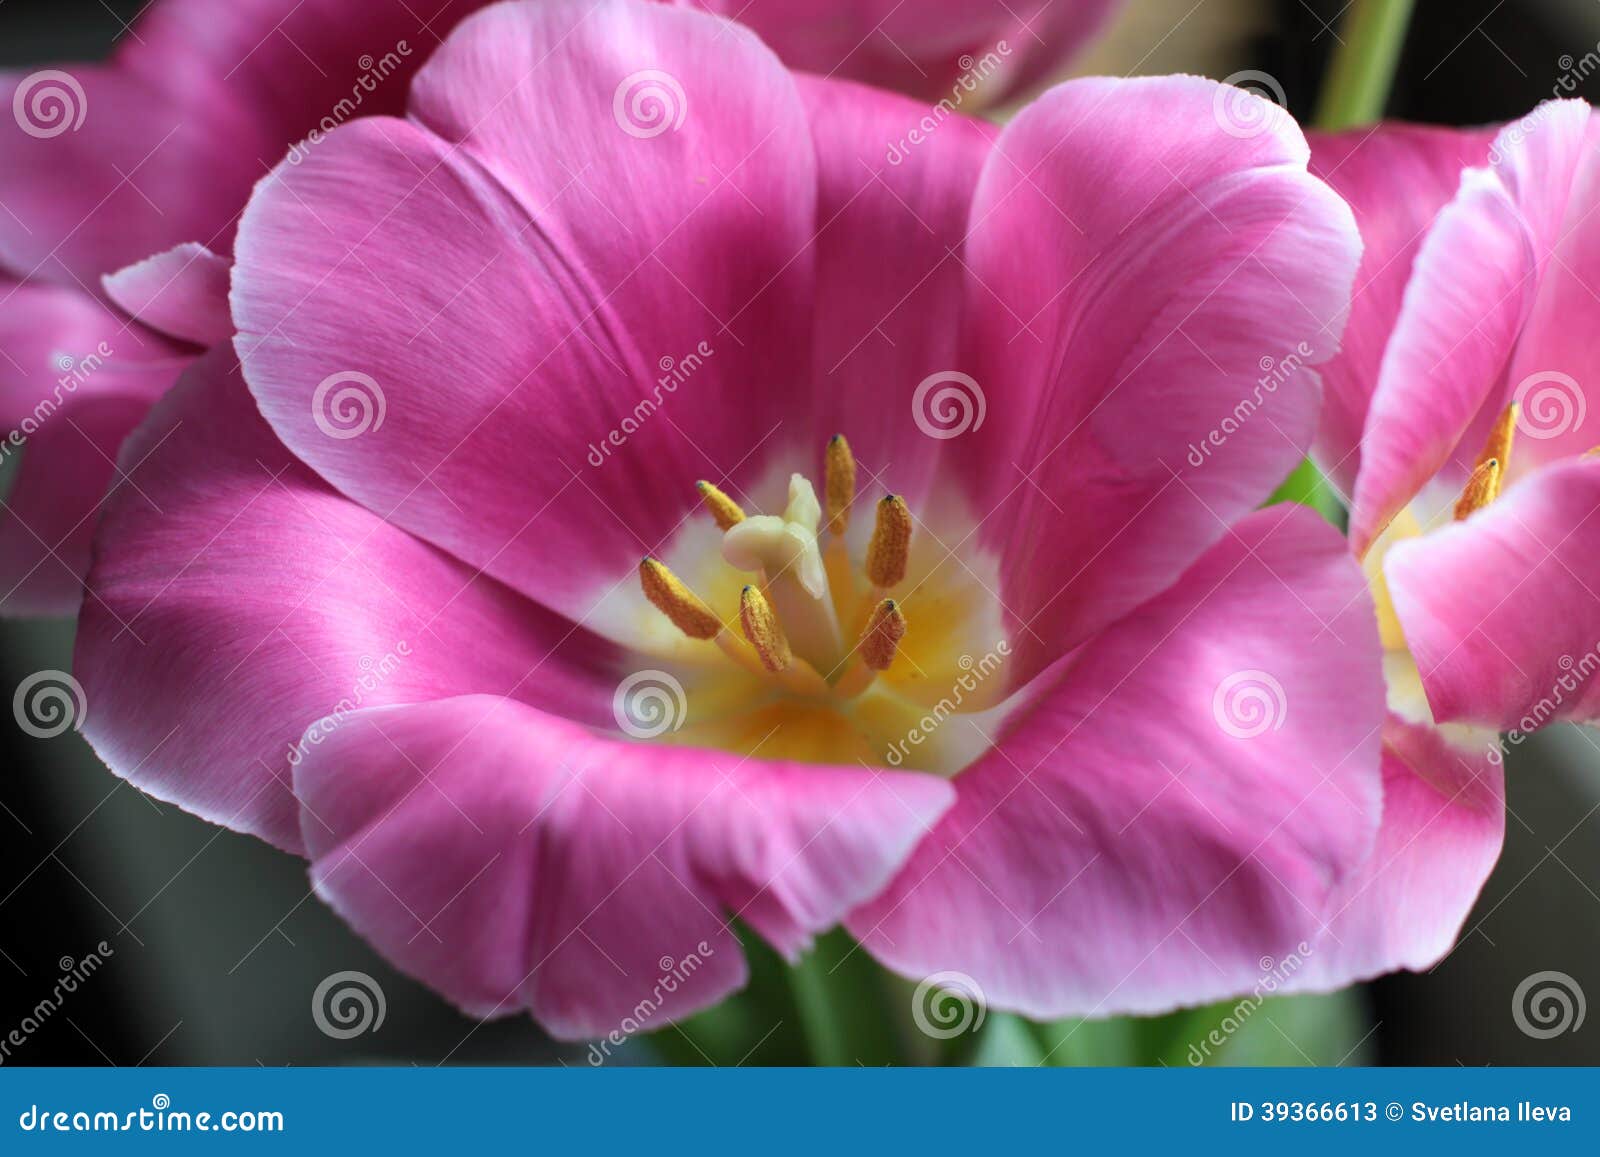 pink tulip with yellow stamen close up